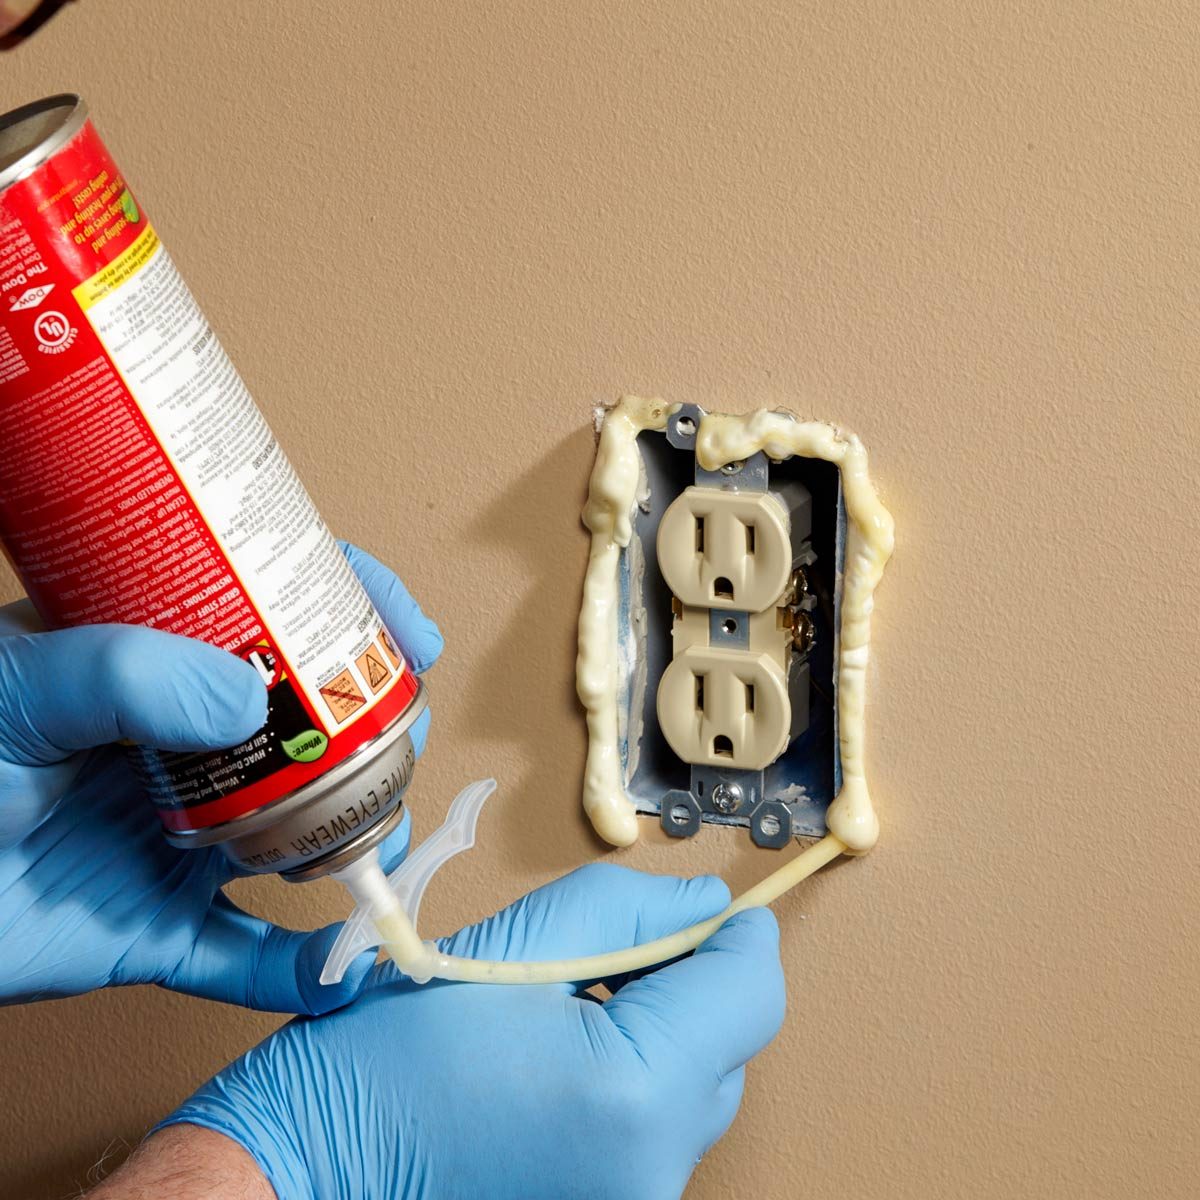 Outlet Insulation Stops Cold Air Coming Through Electrical Outlets